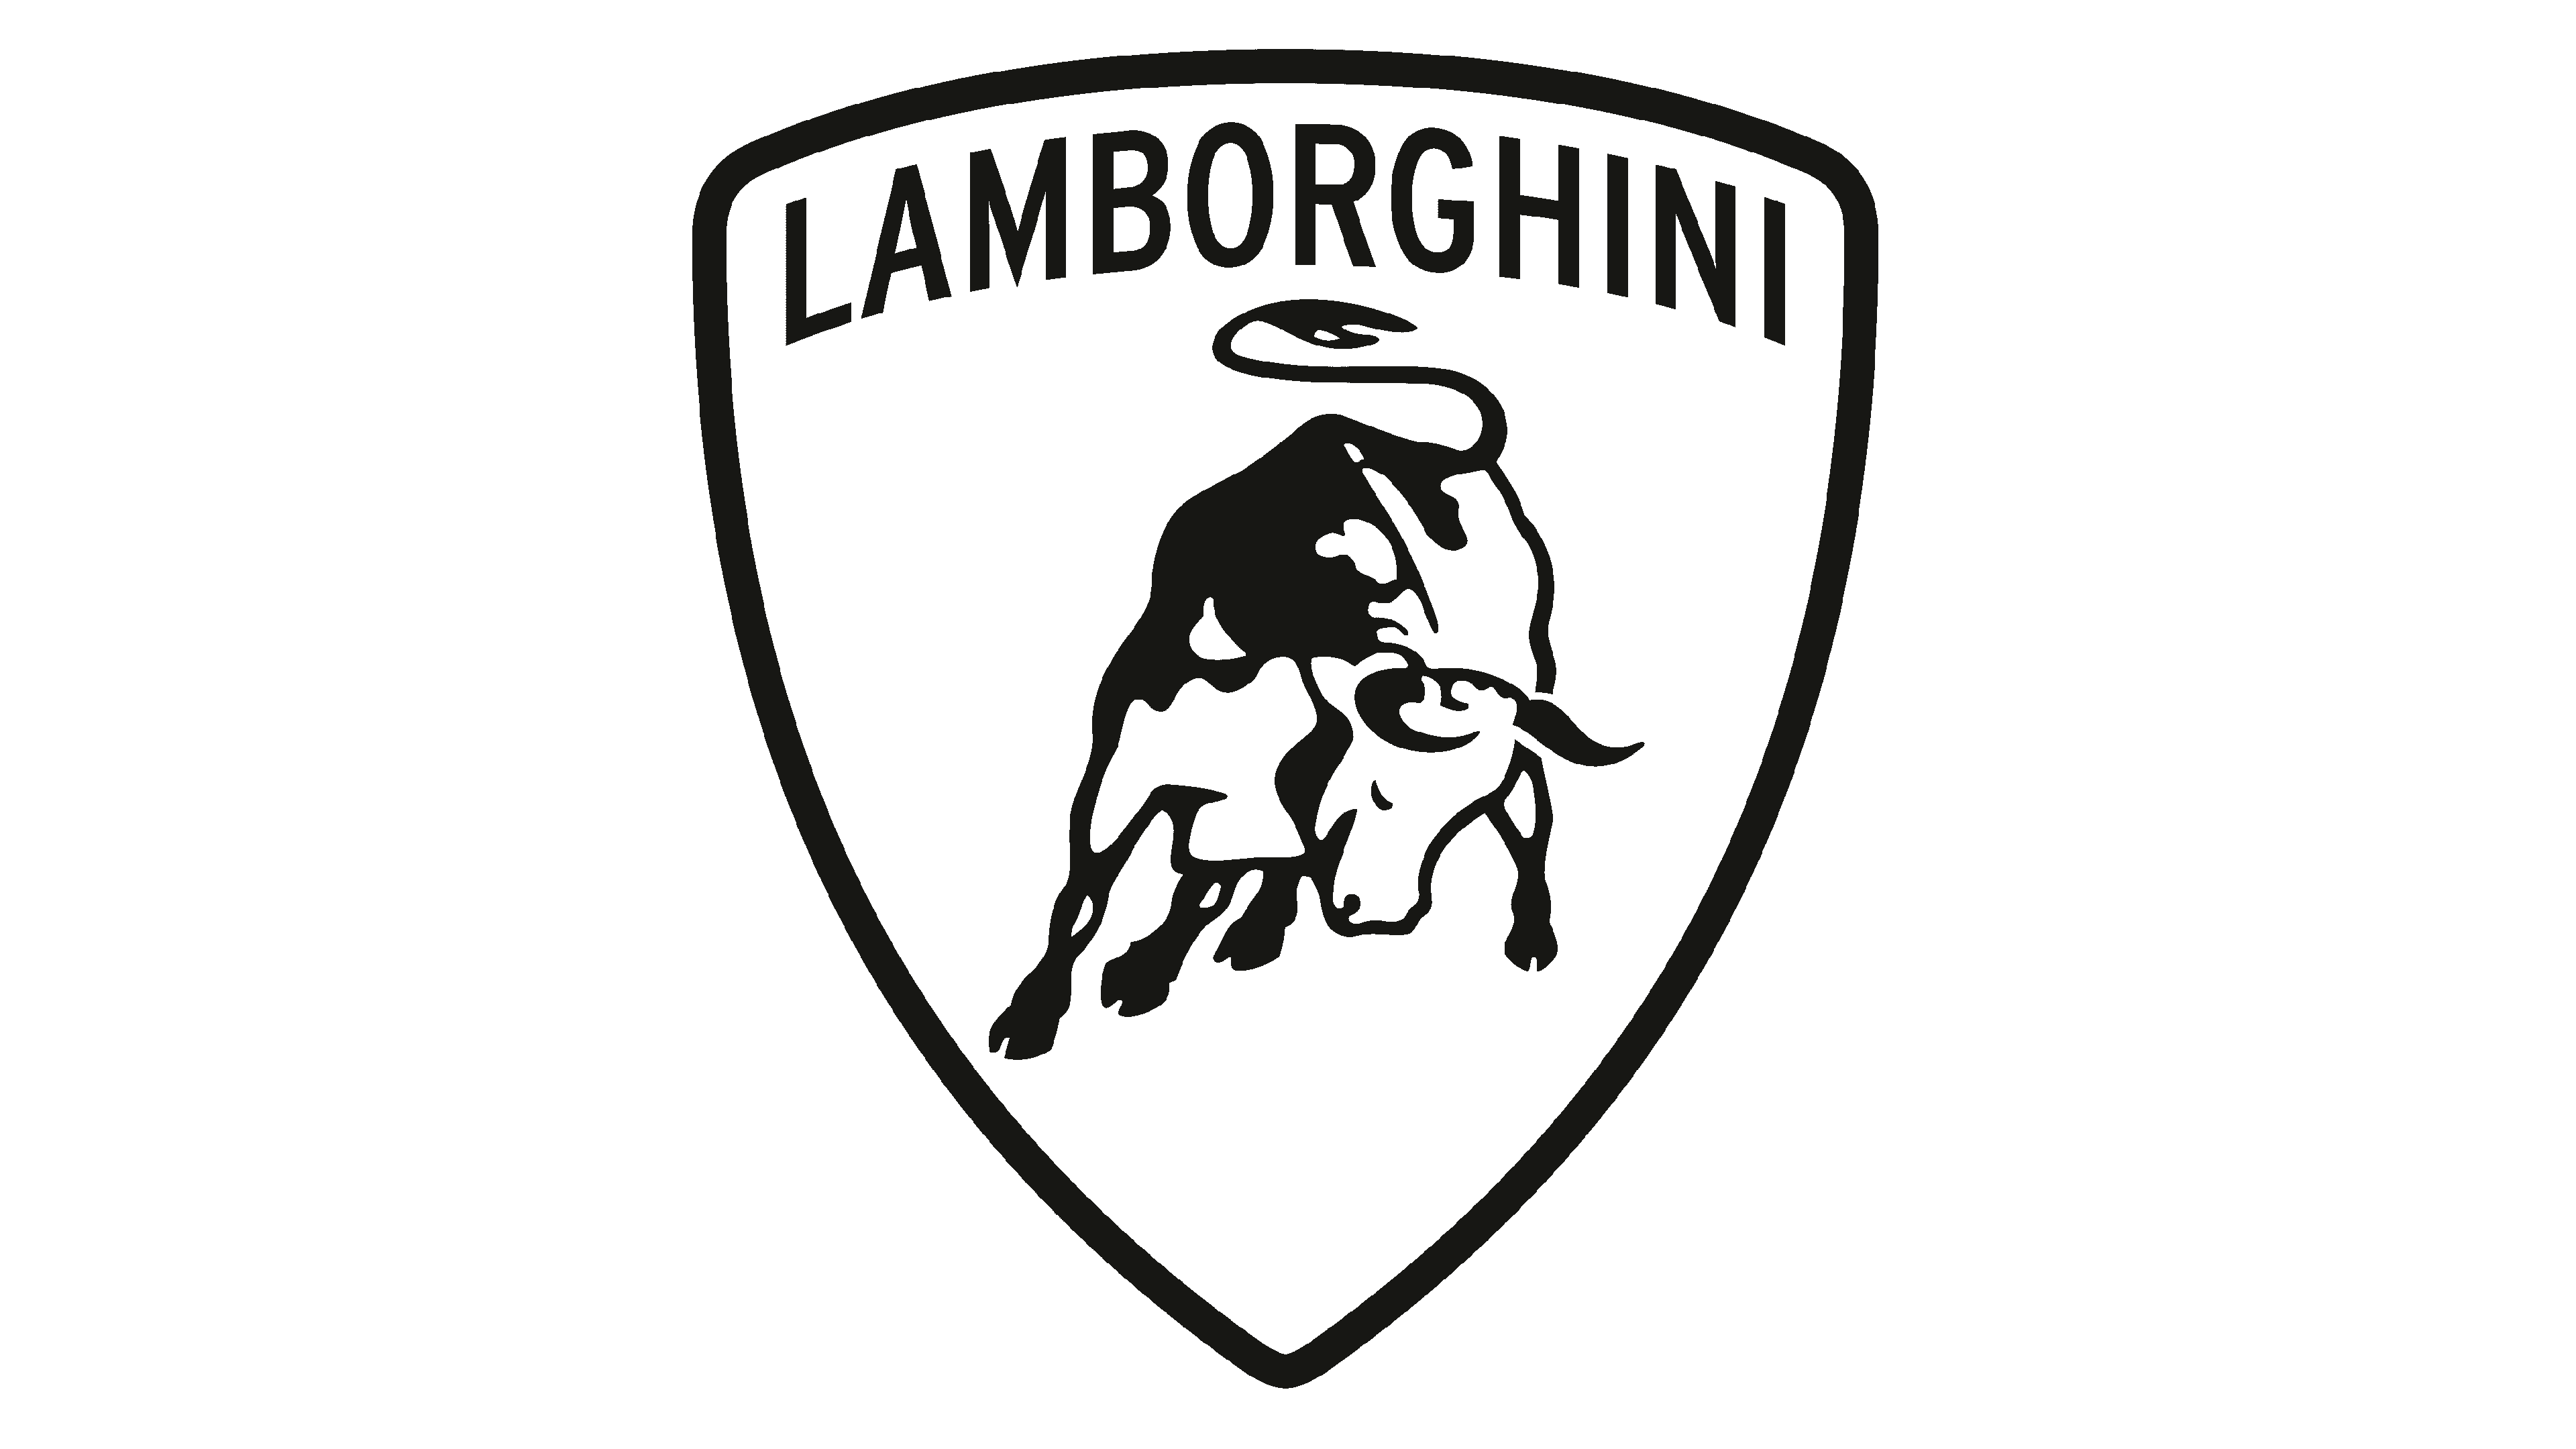 Lamborghini Logo and sign, new logo meaning and history, PNG, SVG